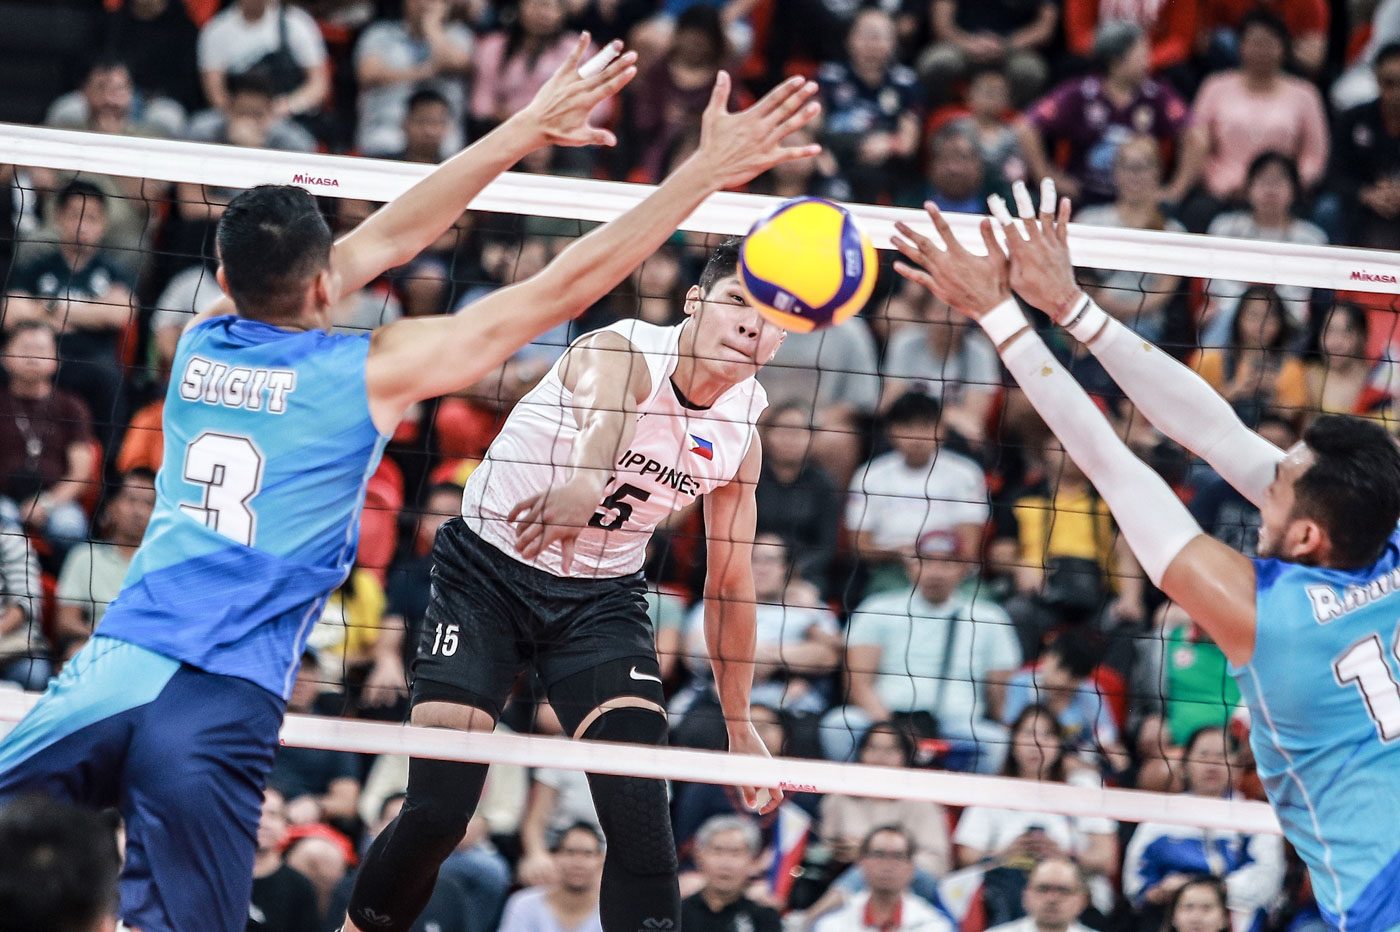 Indonesia Breaks Phs Hearts In Mens Volleyball Sweep 